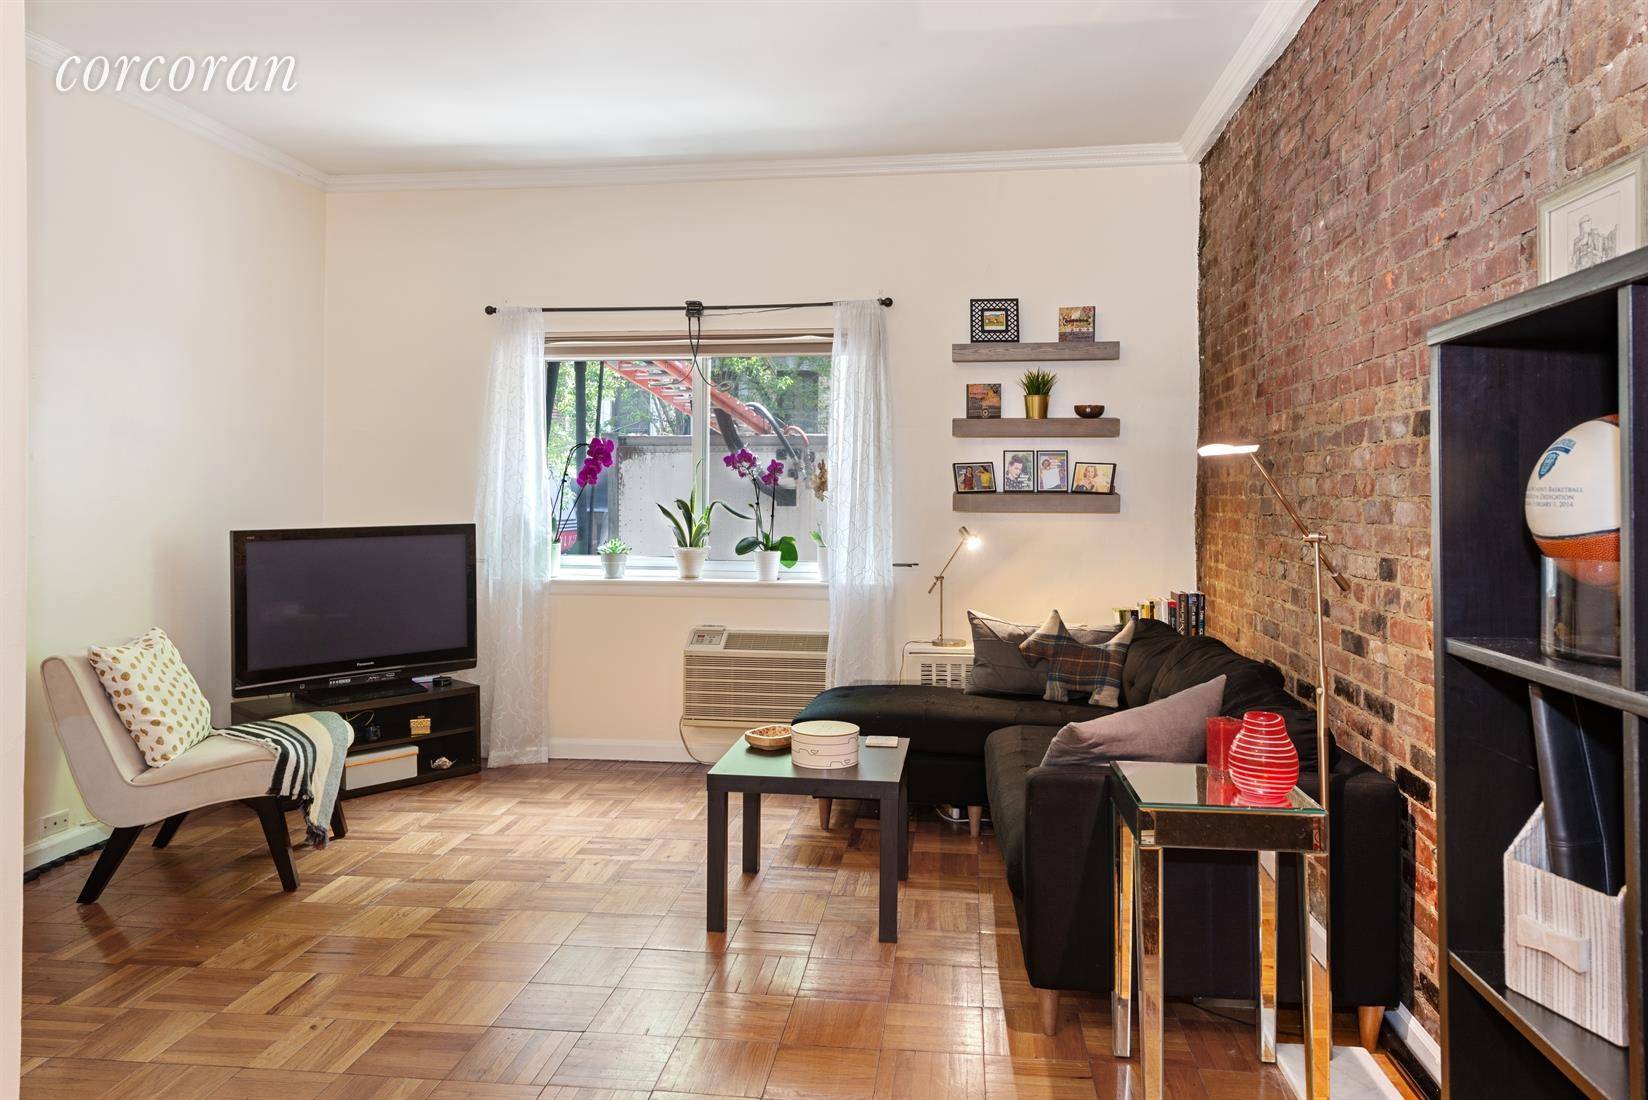 This wonderful Gramercy Park gem is a large one bedroom convertible two bedroom co op apartment nestled on a quiet tree lined street.